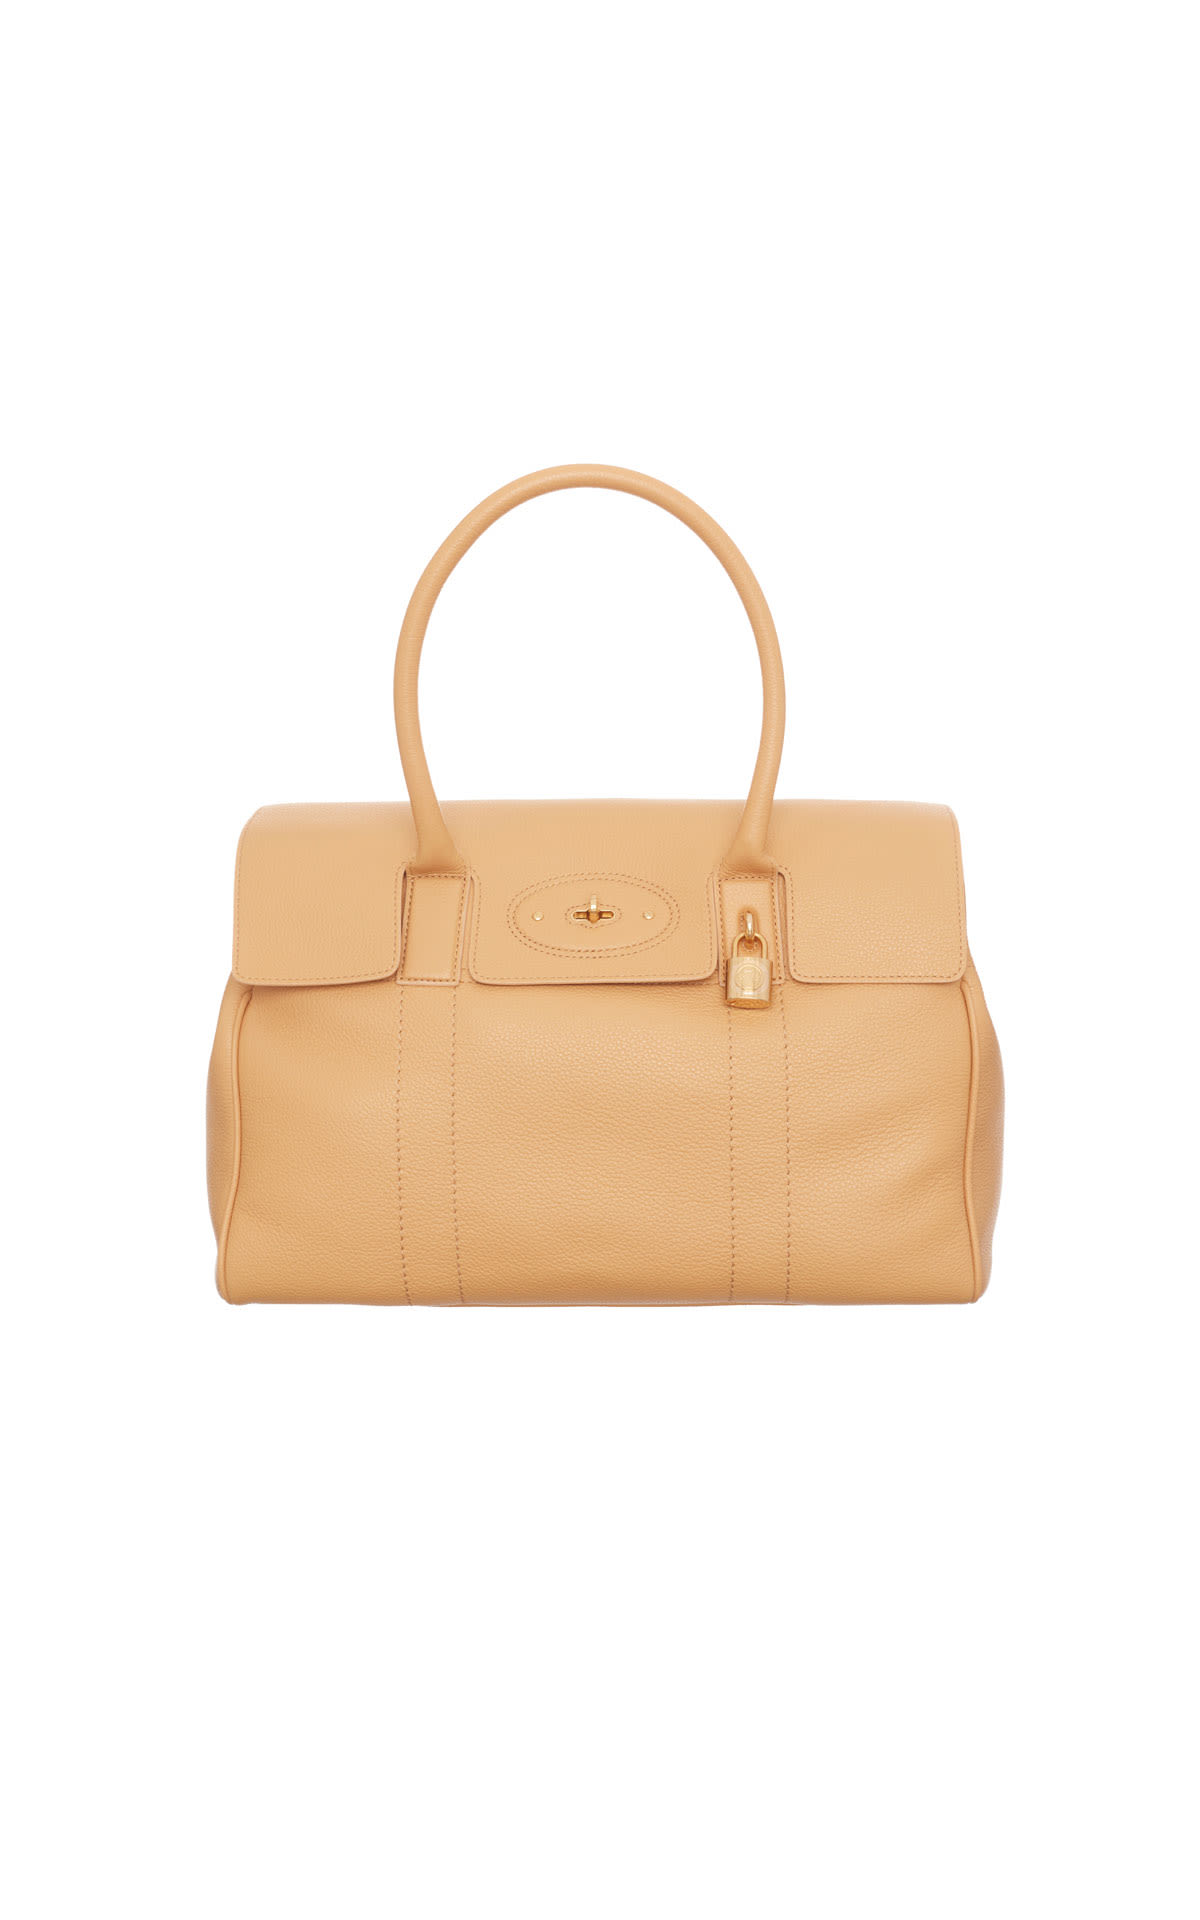 Mulberry Bayswater camel from Bicester Village